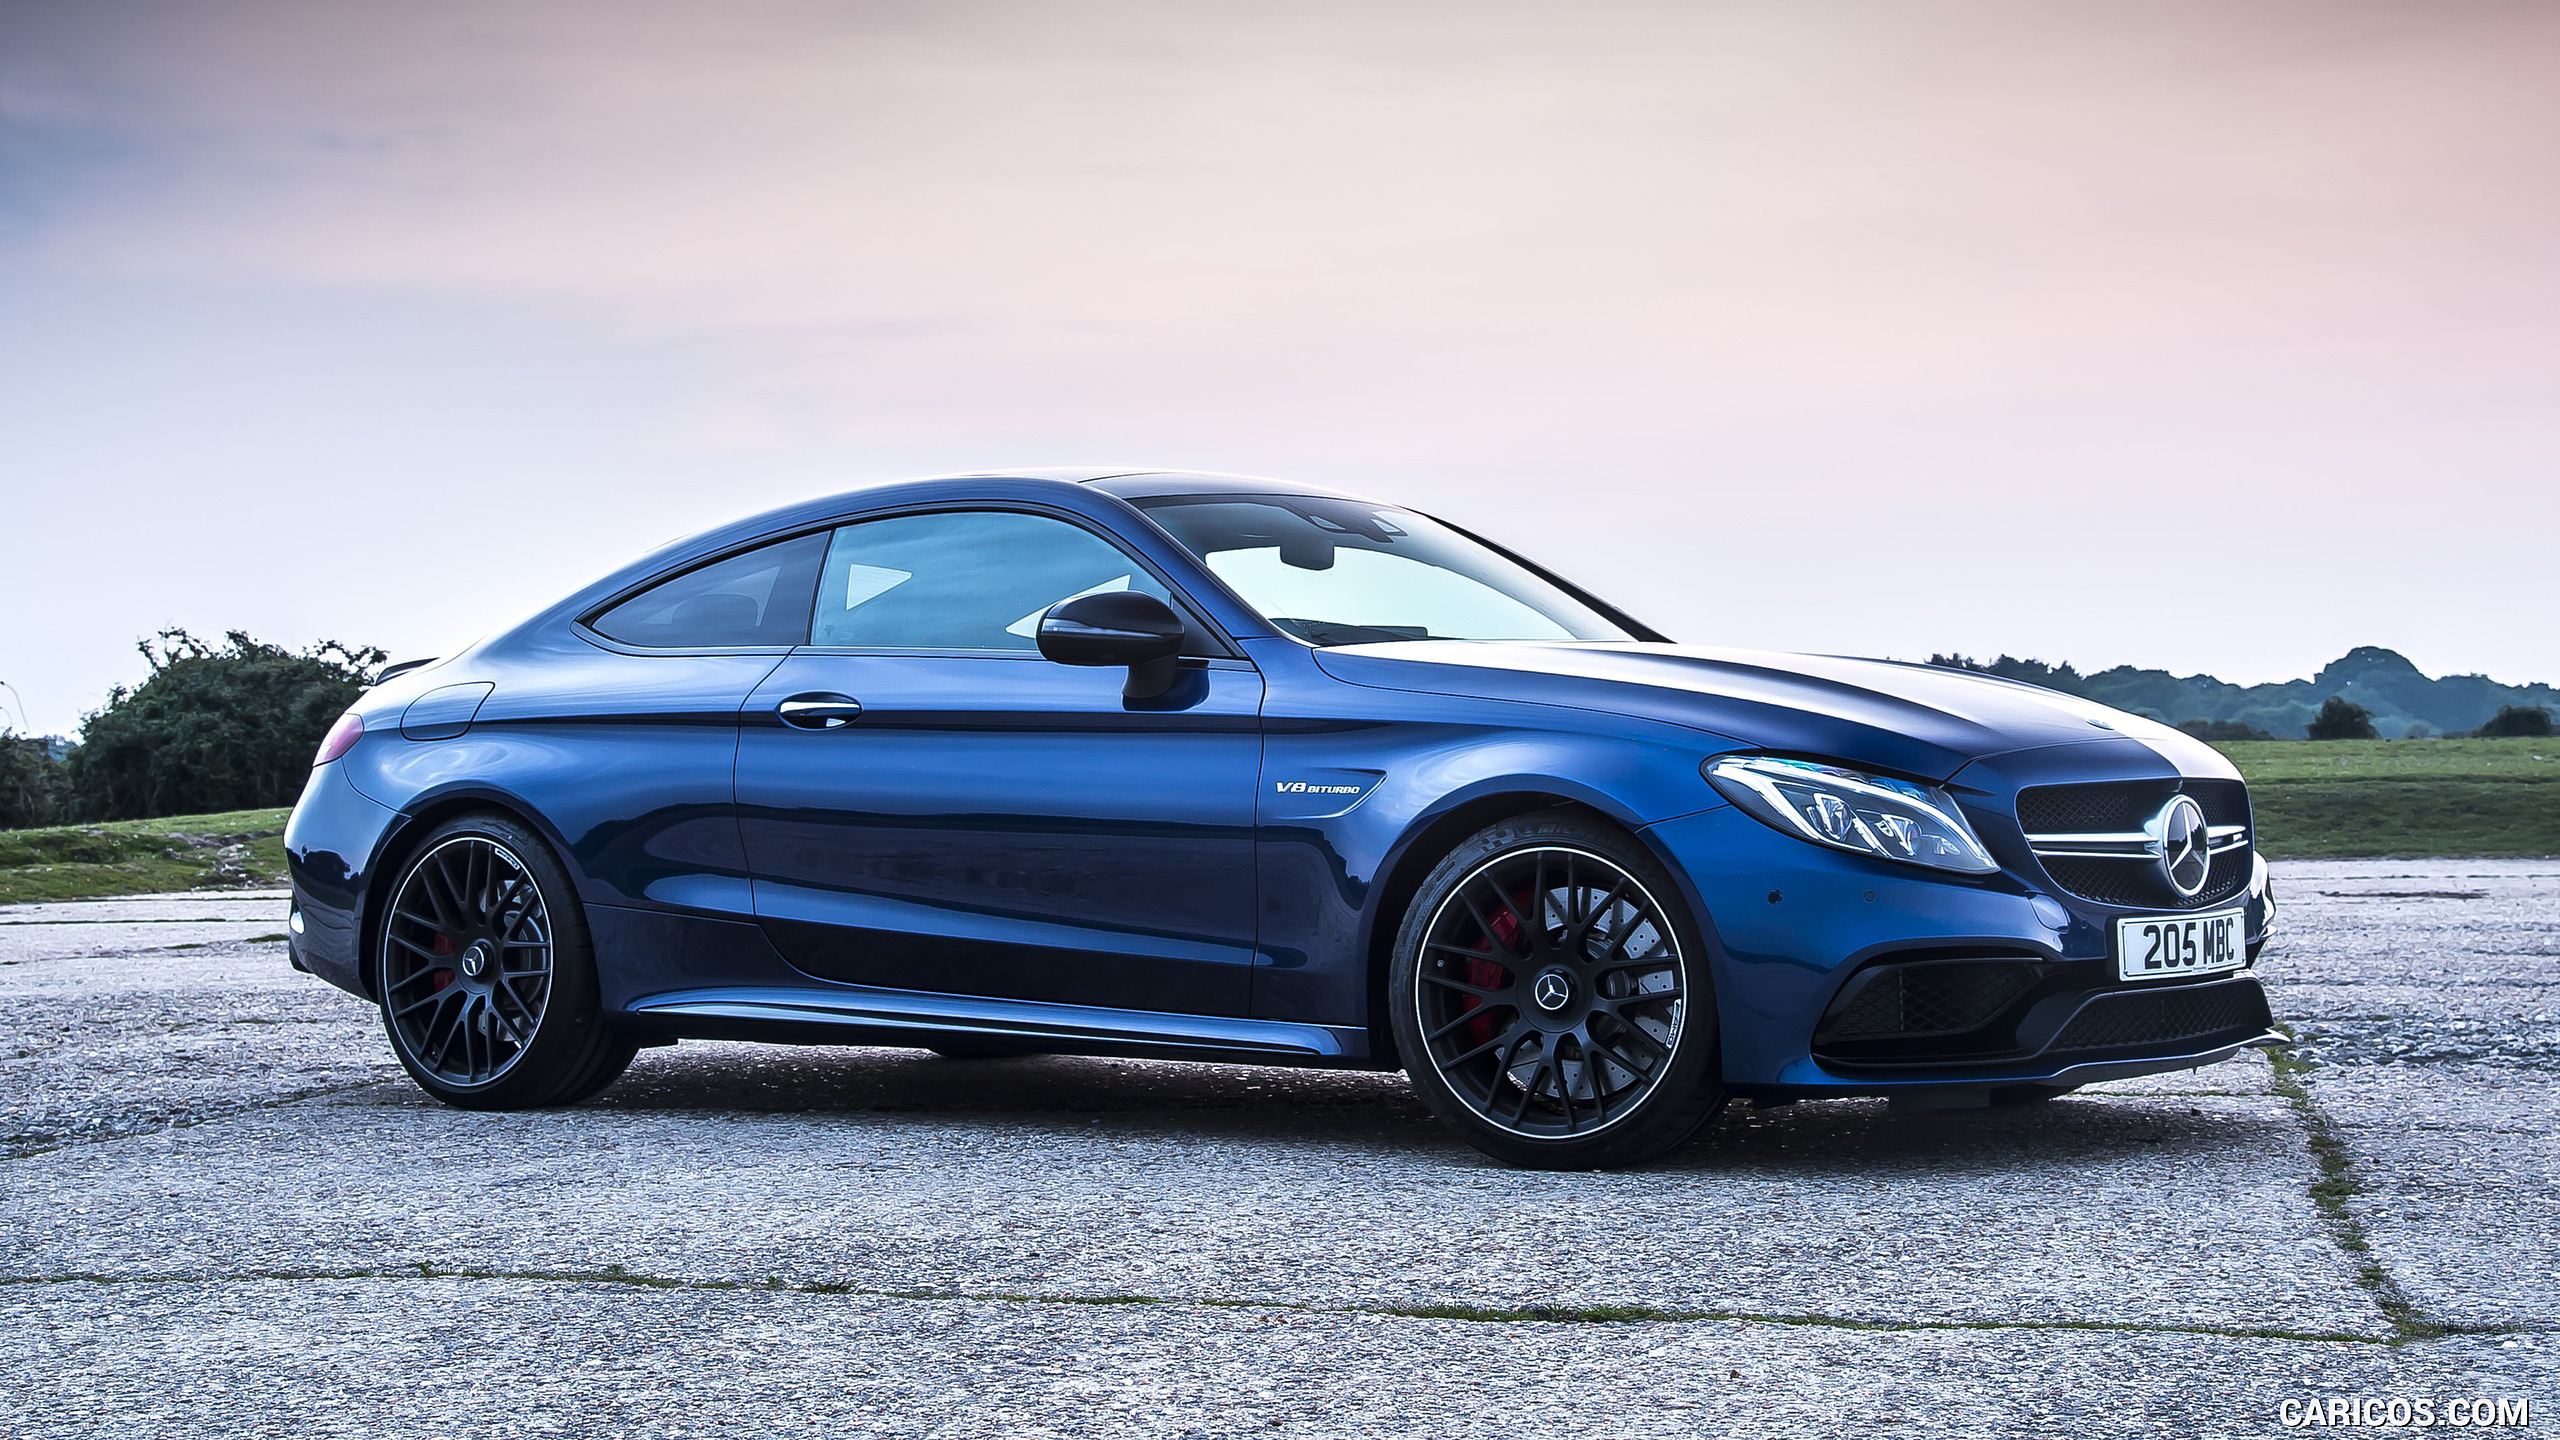 2017 Mercedes-AMG C63 S Coupe (UK-Spec) - Side, #13 of 52